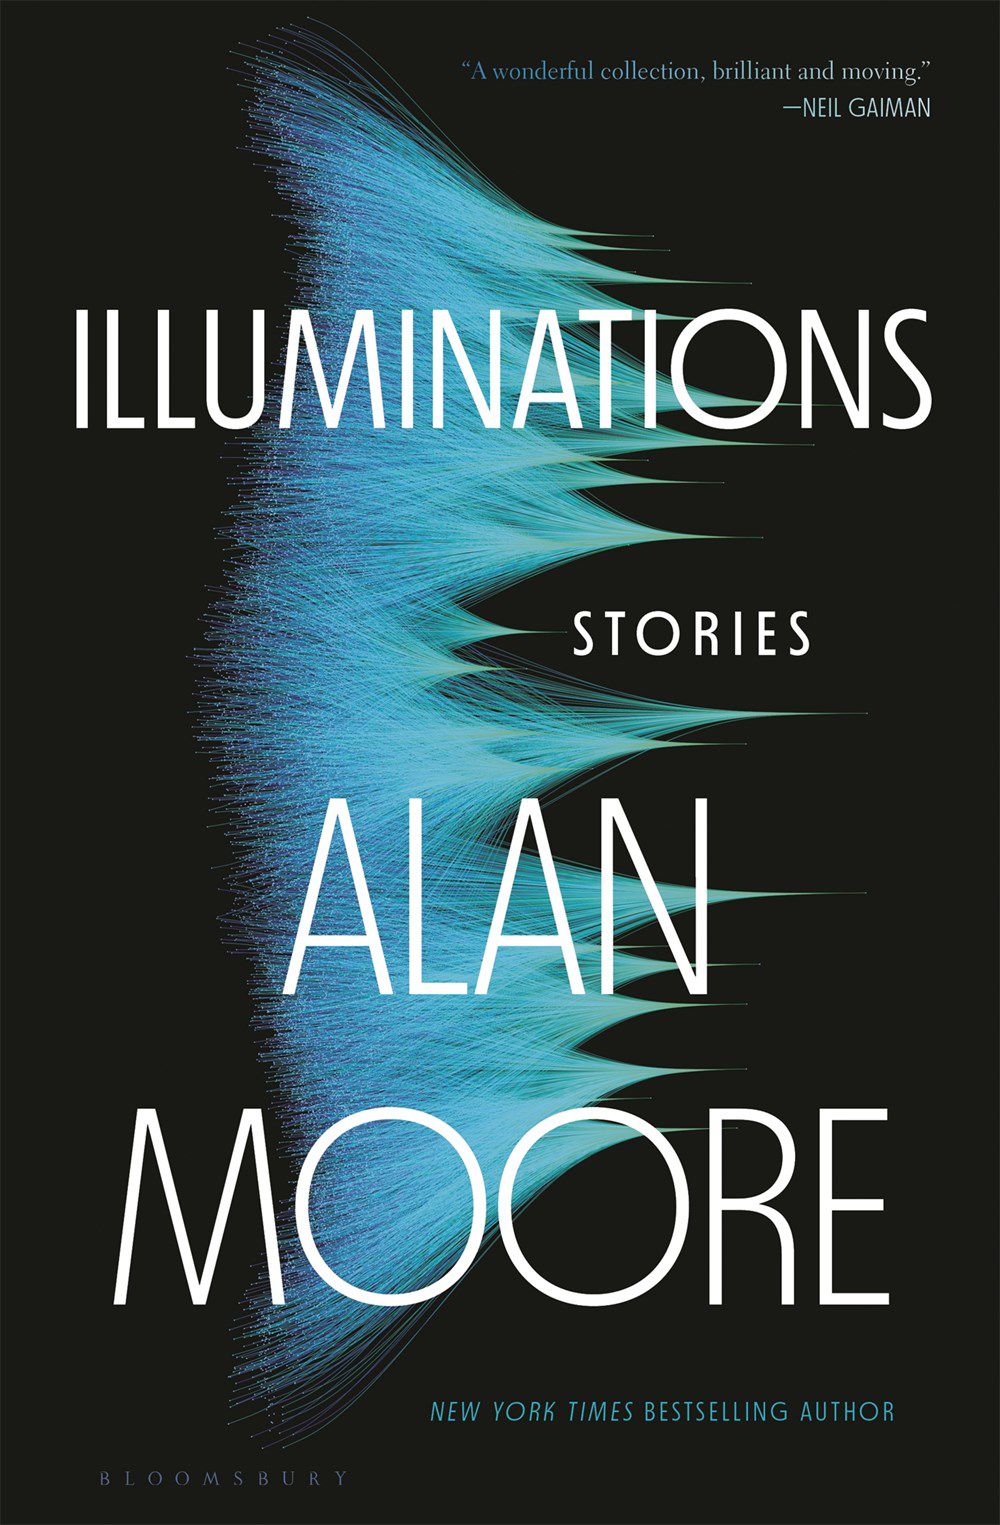 Cover image for Alan Moore's Illuminations, with an image of what look like blue mountain peaks to the side